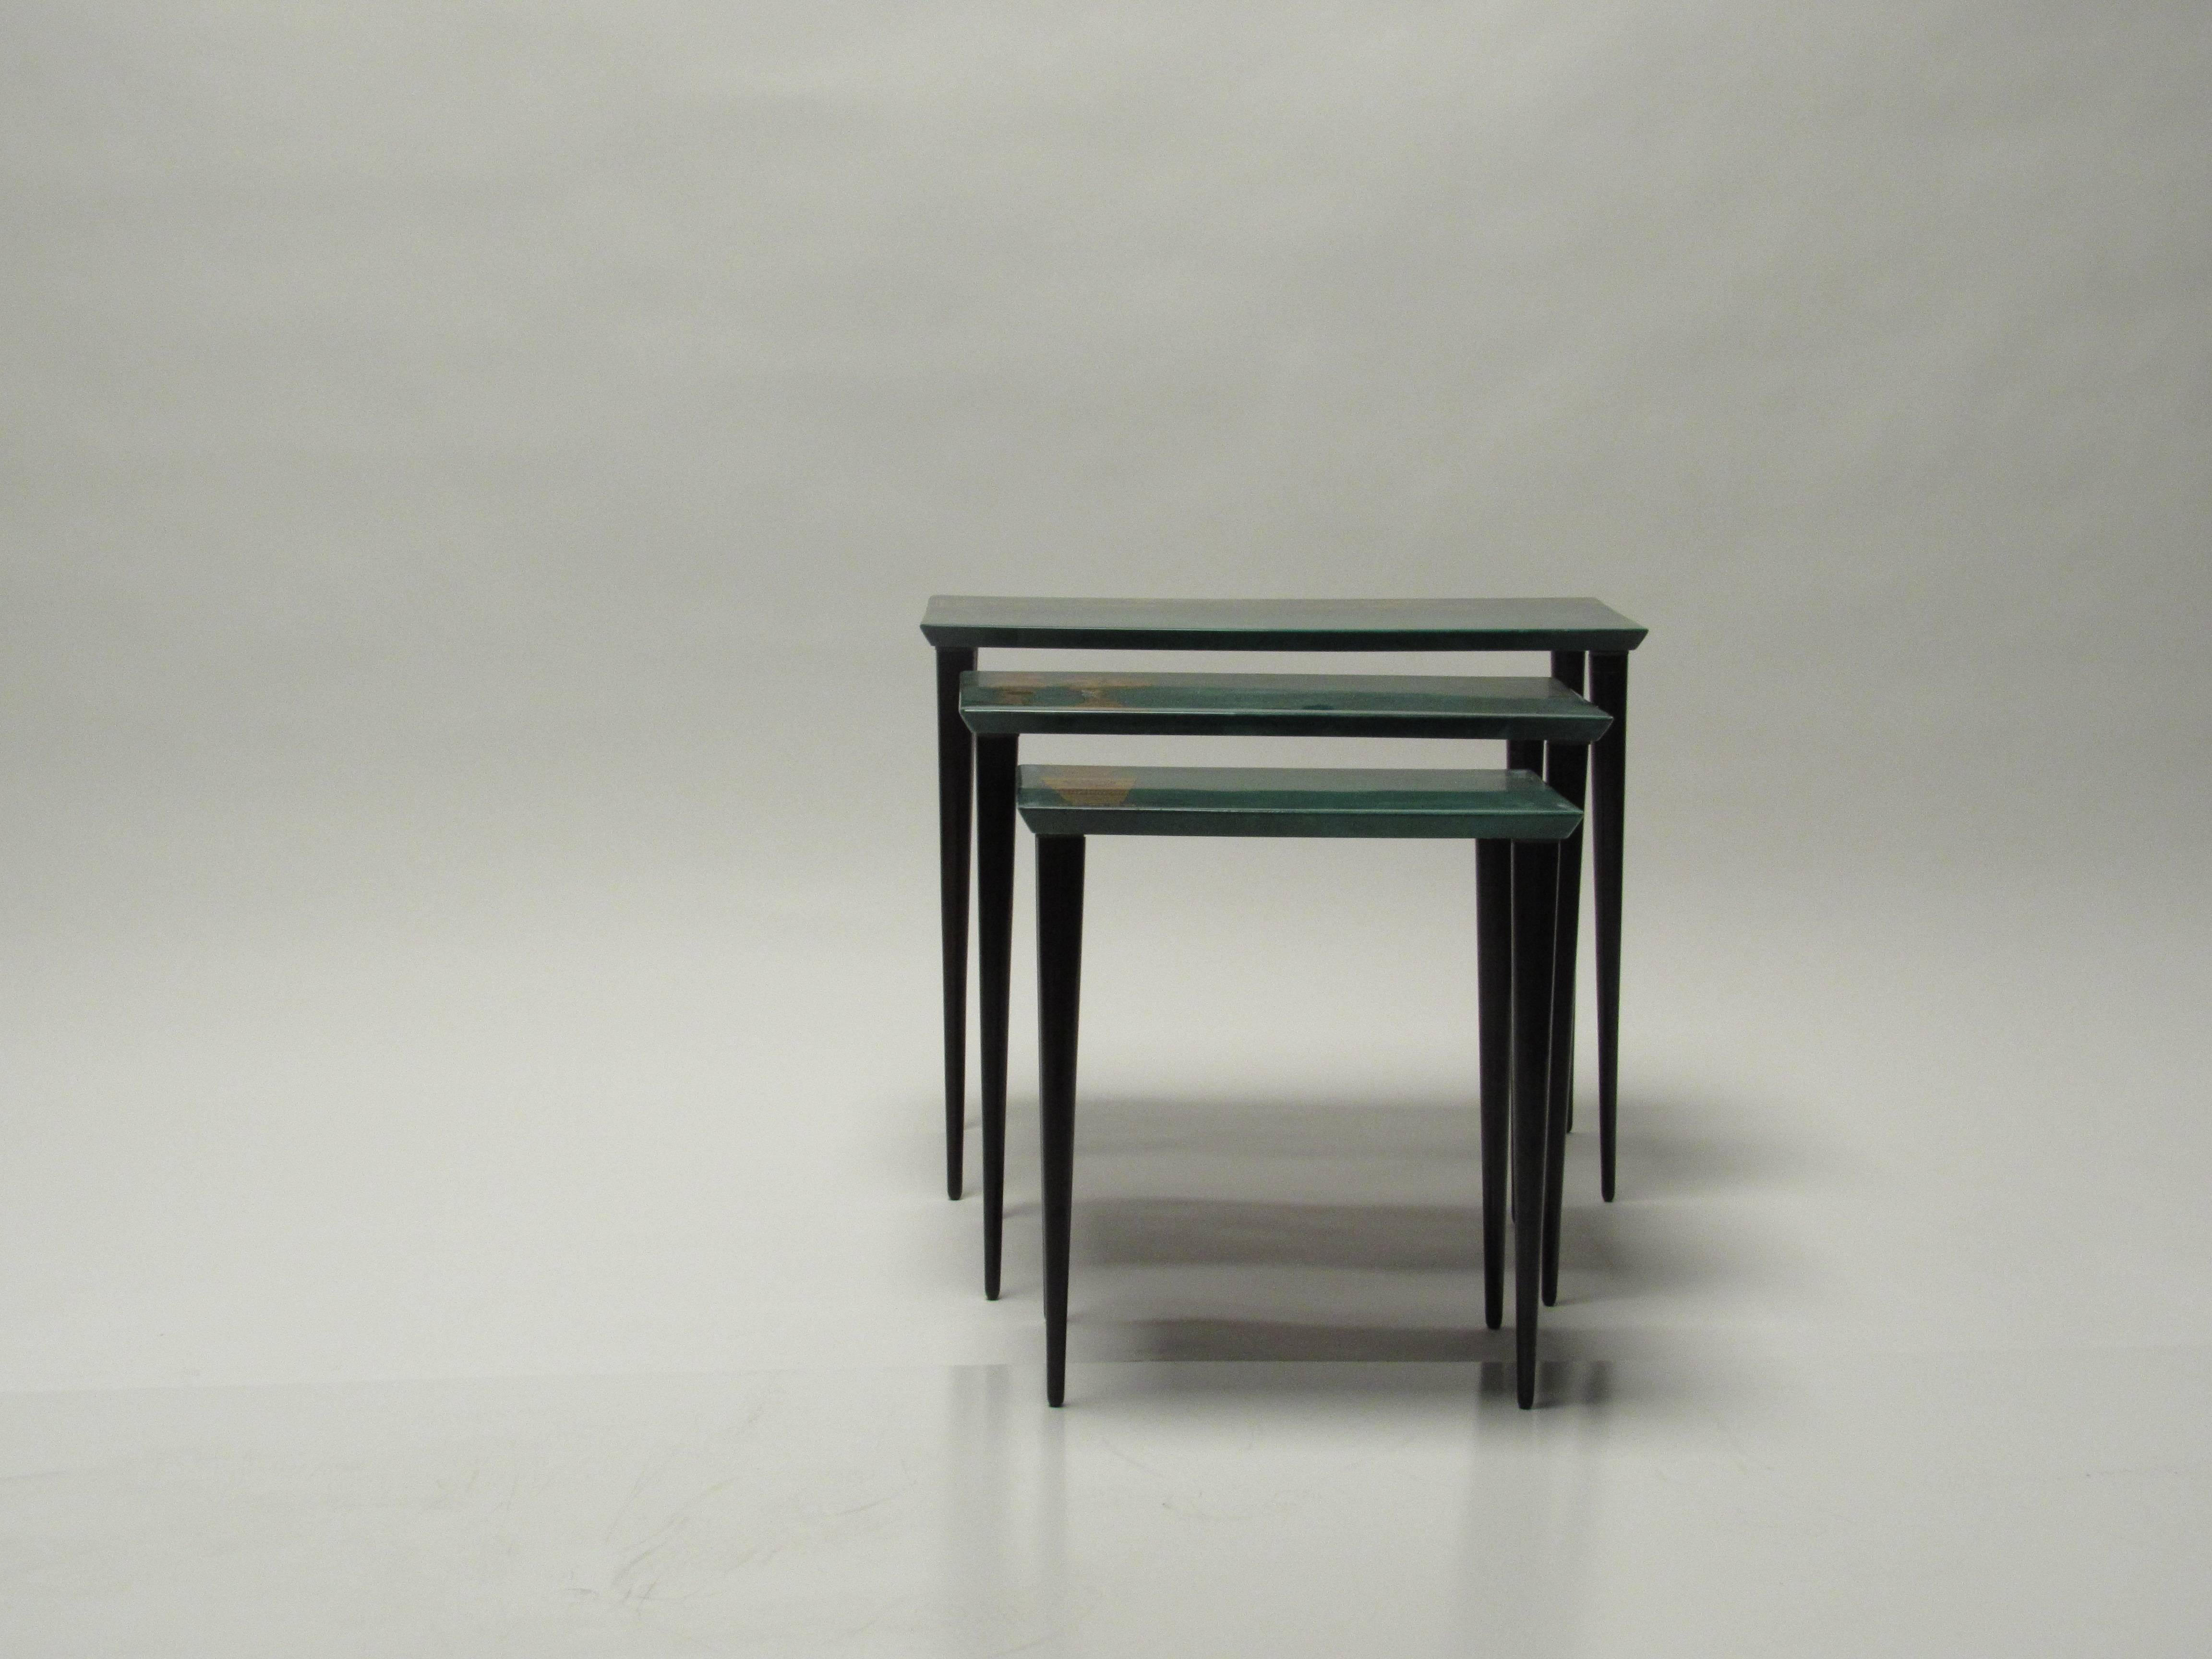 Aldo Tura Nesting Tables in Emerald Green Goatskin, Italy,  1950s.  Aldo Tura’s sense of humor and playfulness along with his use of luxury materials, exceptional level of craftsmanship, and spirit of glamorous hospitality are showcased in this set